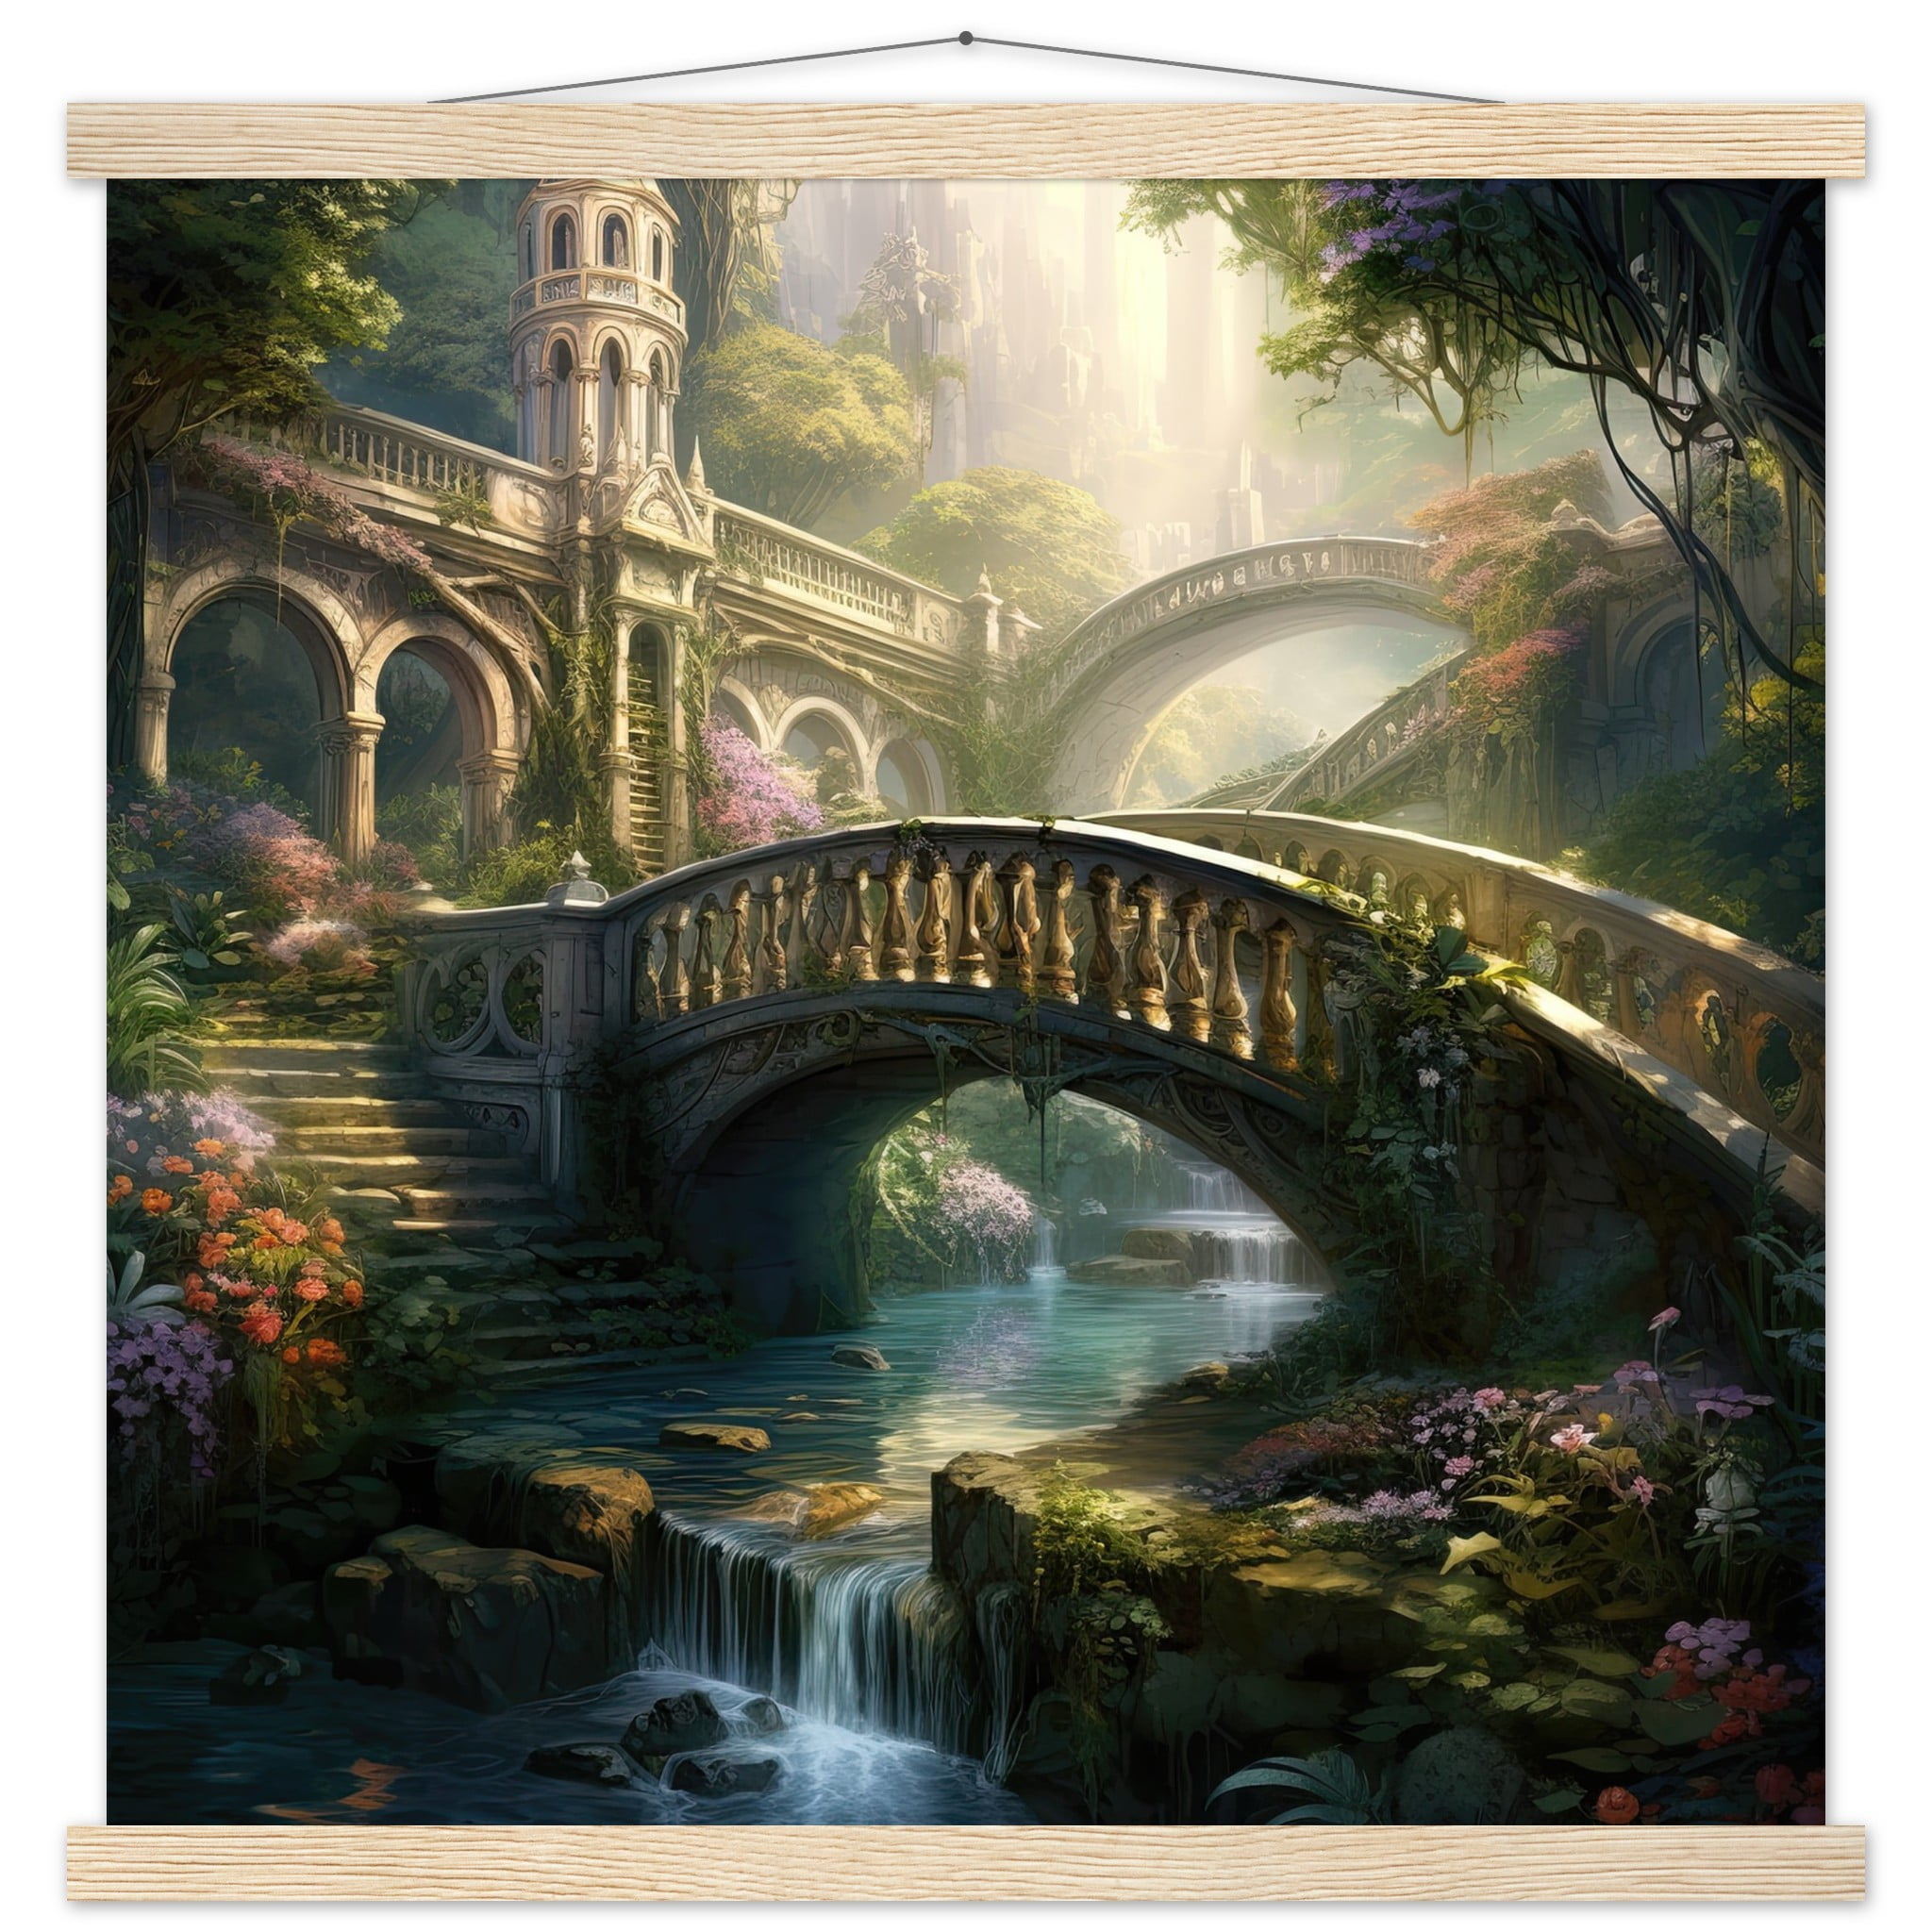 Bridge to the Kingdom of Paradise Art Print with Hanger – 50×50 cm / 20×20″, Natural wood wall hanger